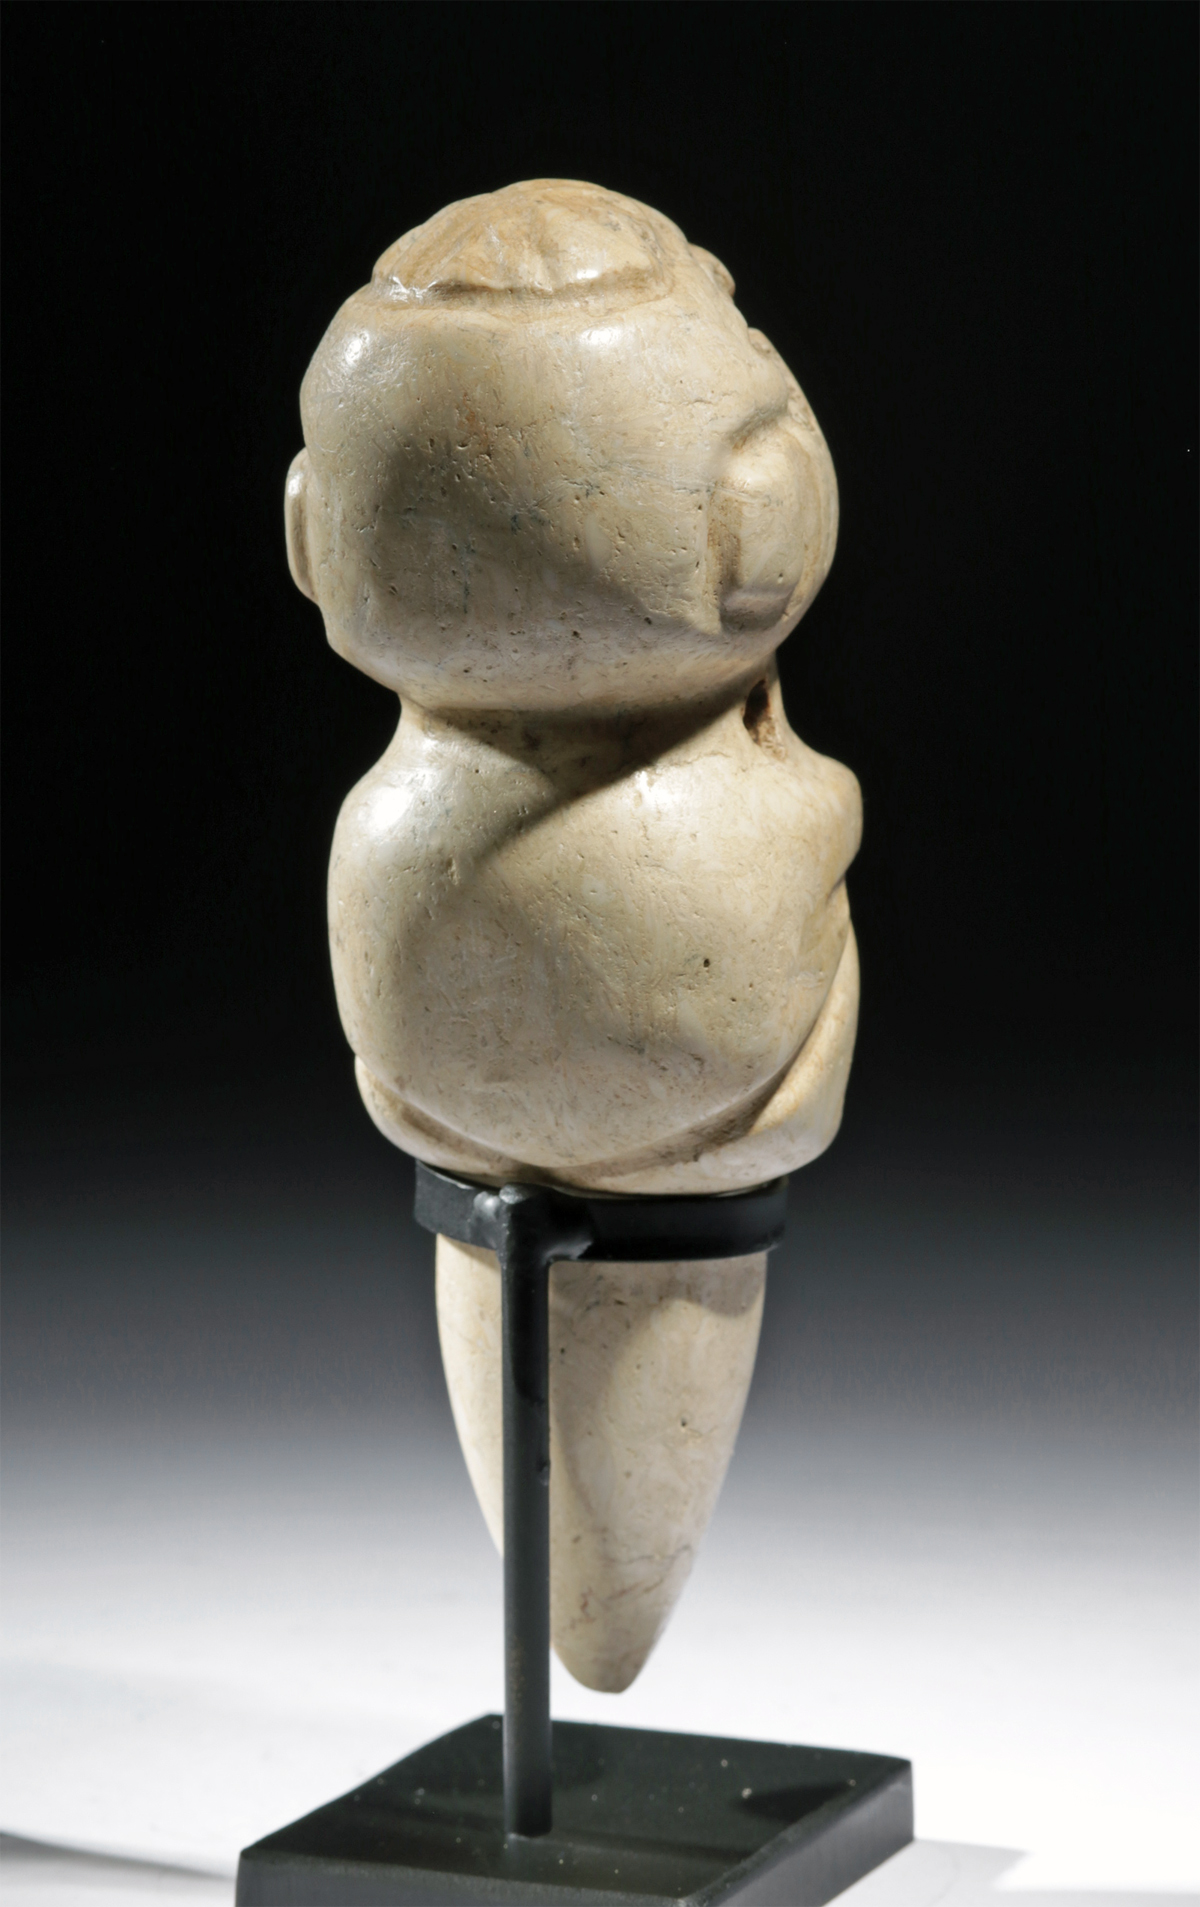 Large Costa Rican Stone Figural Amulet - Image 4 of 4